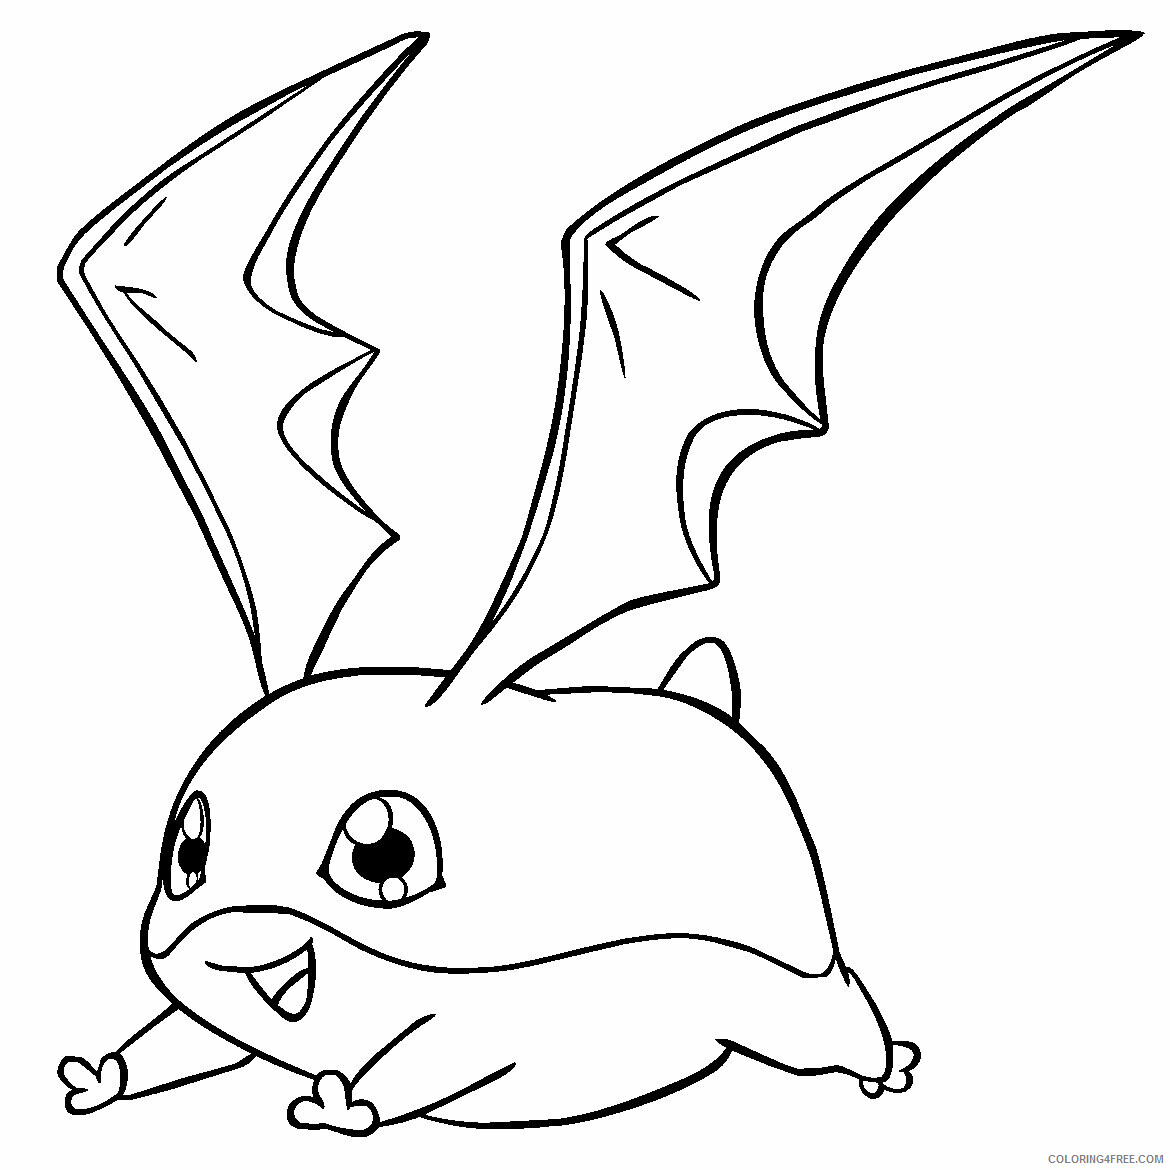 Digimon Printable Coloring Pages Anime digimon 17 2021 0259 Coloring4free